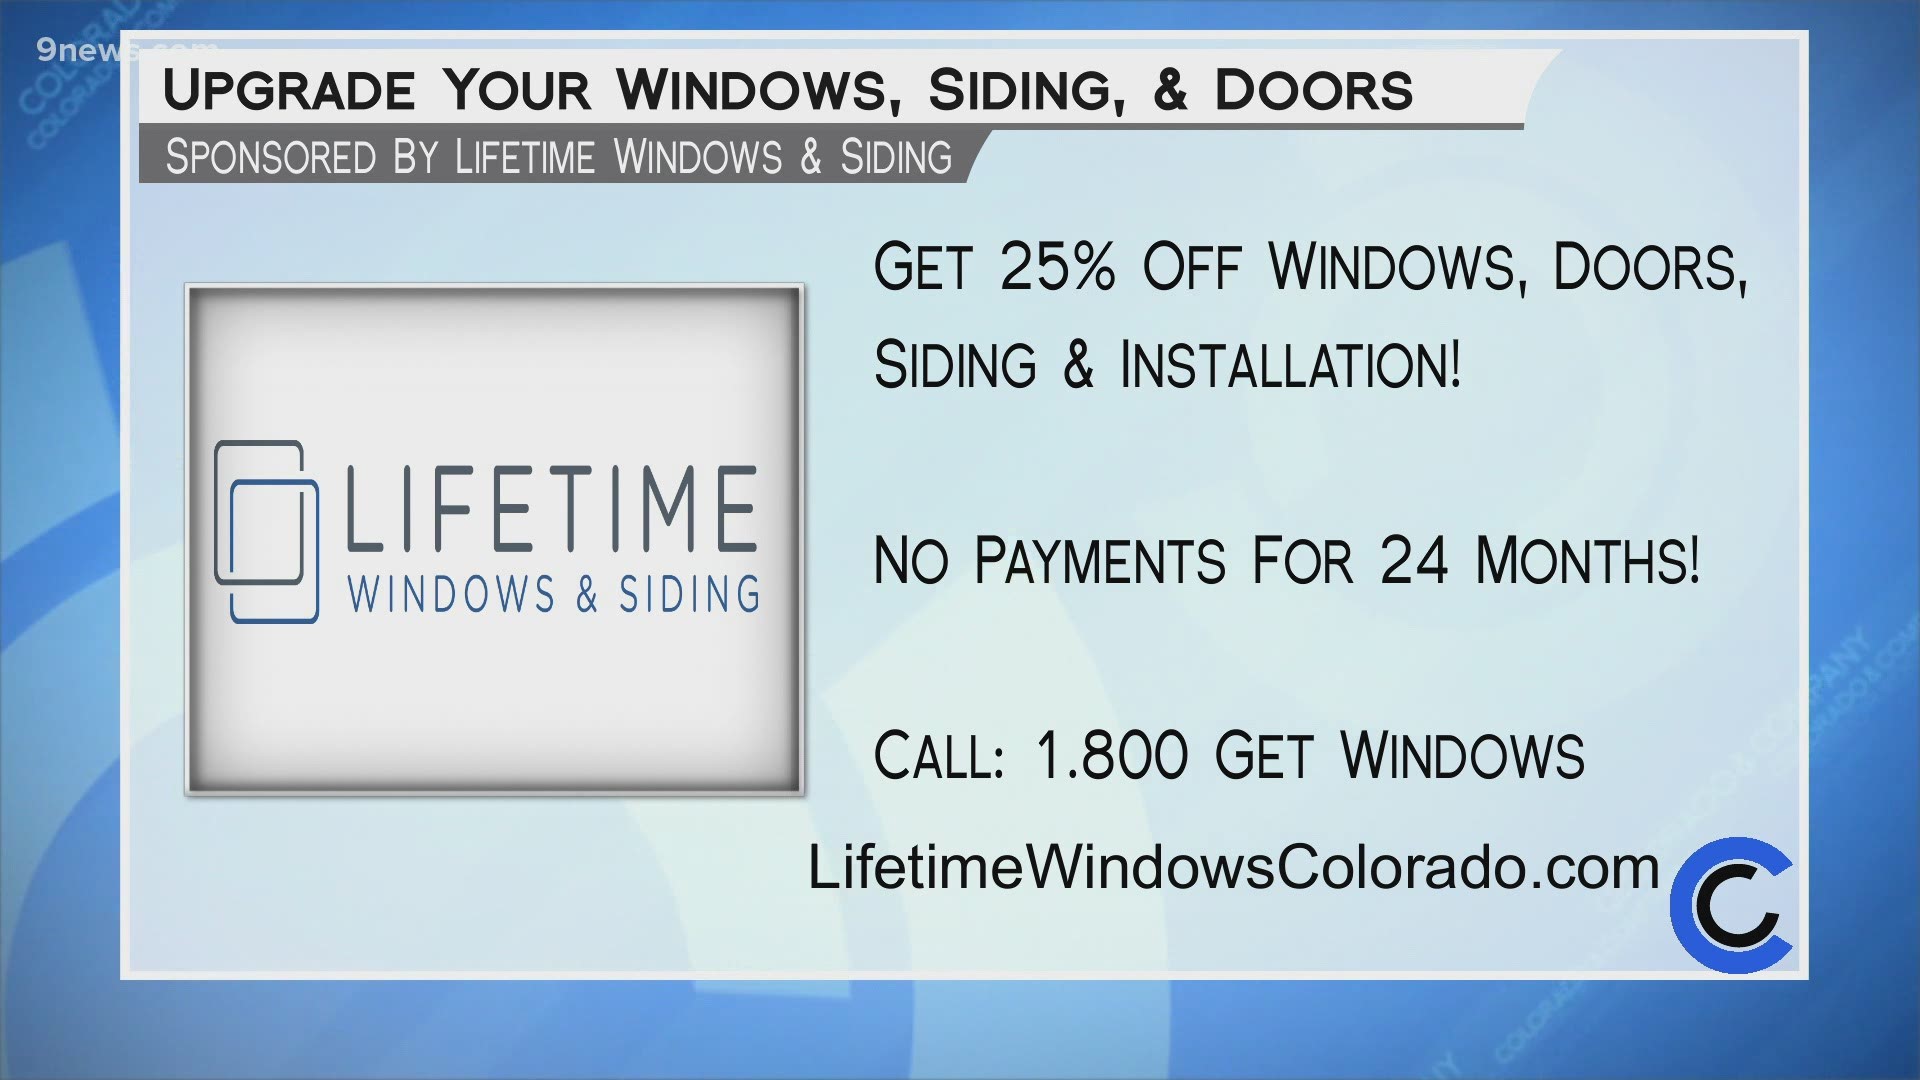 Right now you can save 25% on windows, doors, siding and installation, 0% interest, no money down, and no payments for 24 months! Visit LifetimeWindowsColorado.com.